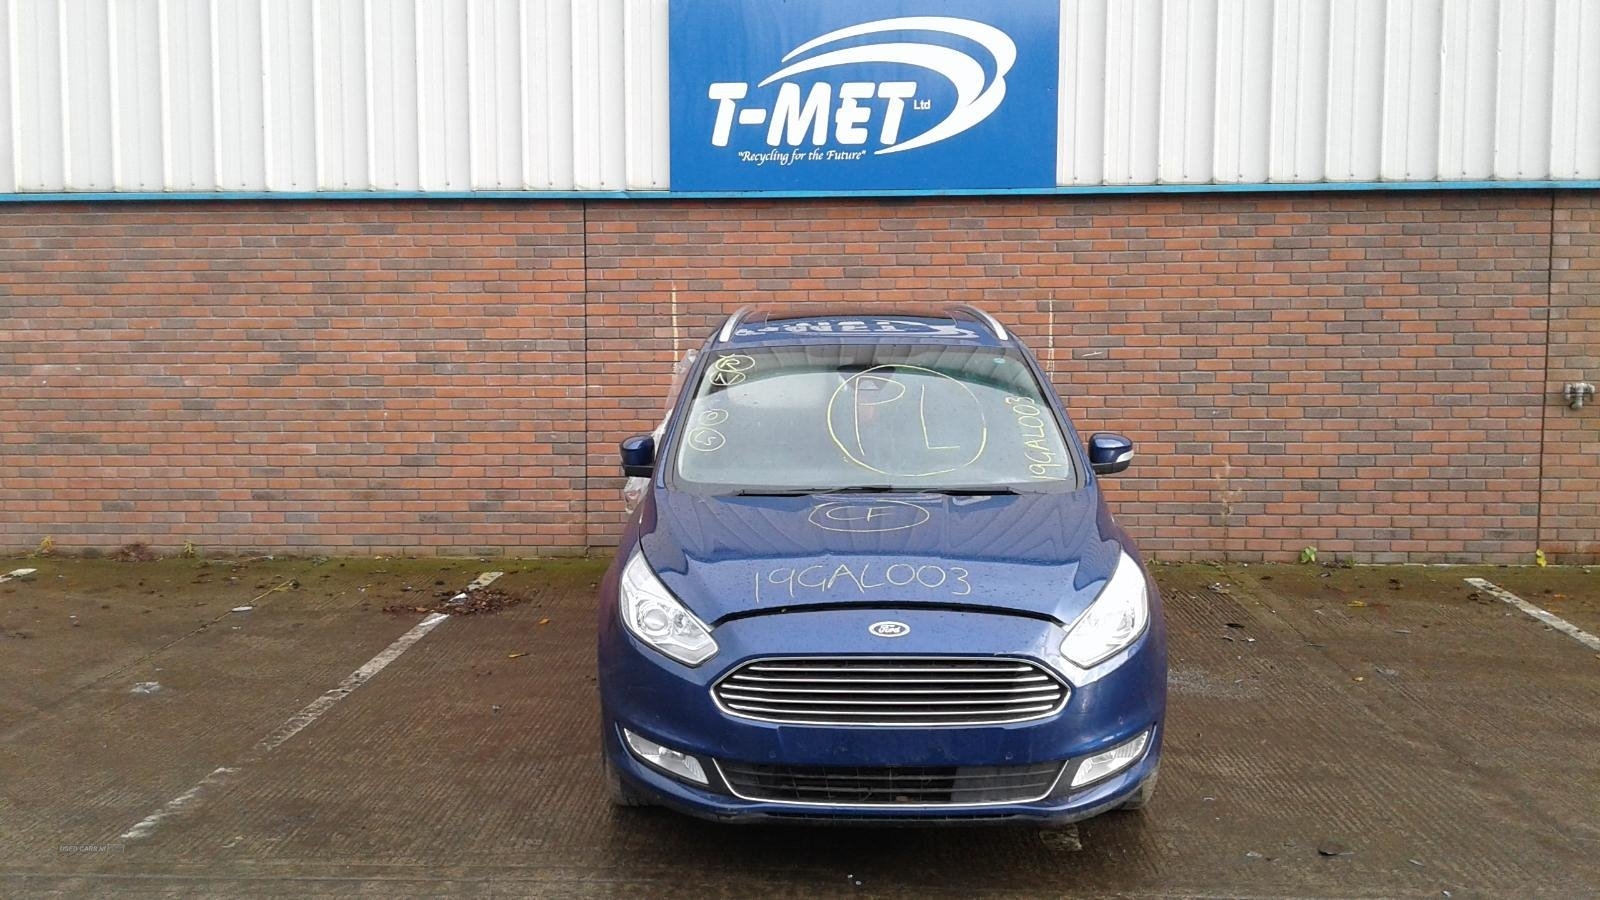 Salvaged 2017 Ford Galaxy 2.0 TDCi 150 Titanium X 5dr Powershift For Sale